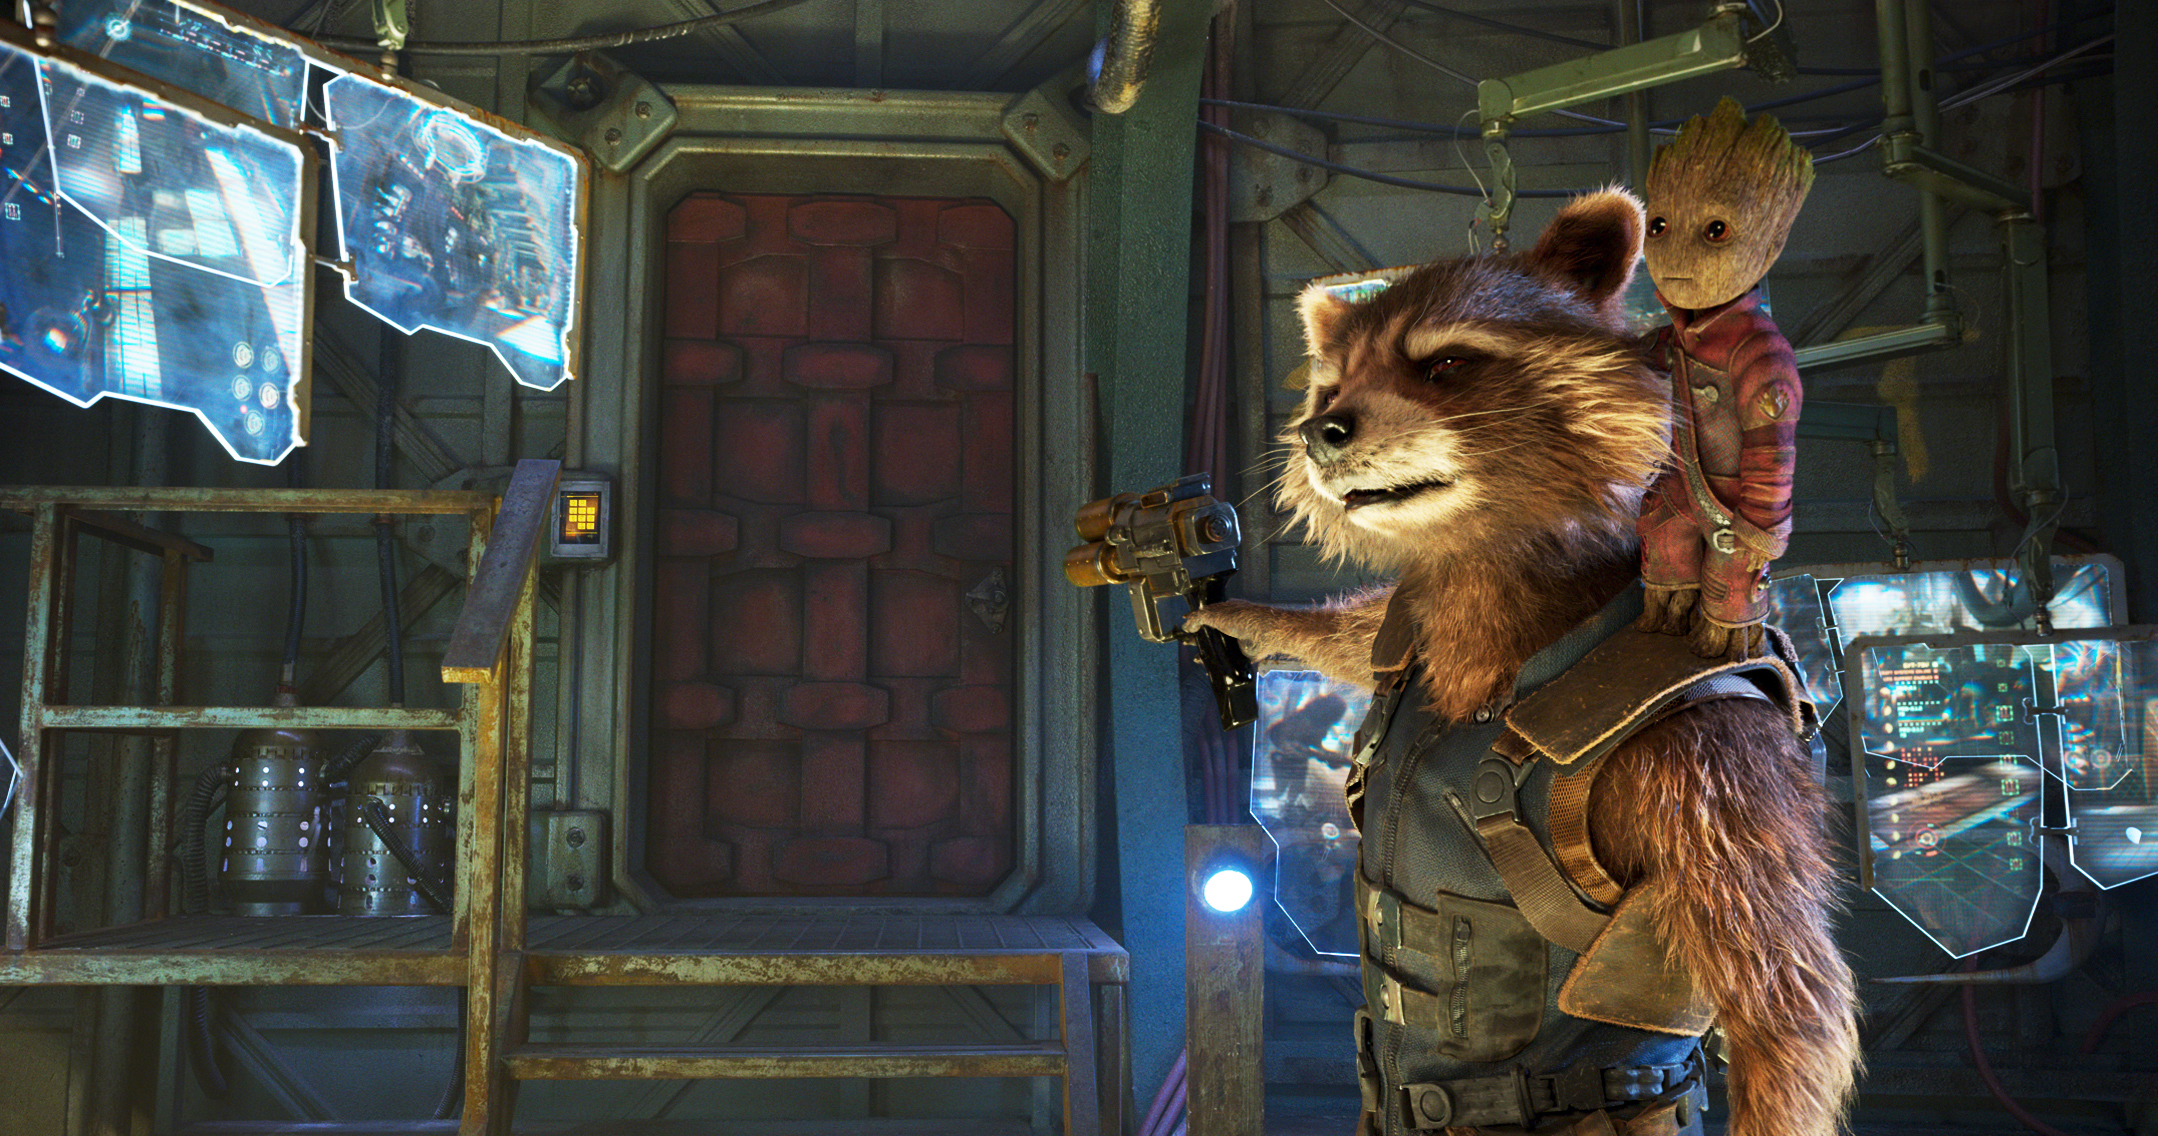 Rocket, voiced by Bradley Cooper, and Groot, voiced by Vin Diesel in <i>Guardians Of The Galaxy Vol. 2</i>. (©Marvel Studios)